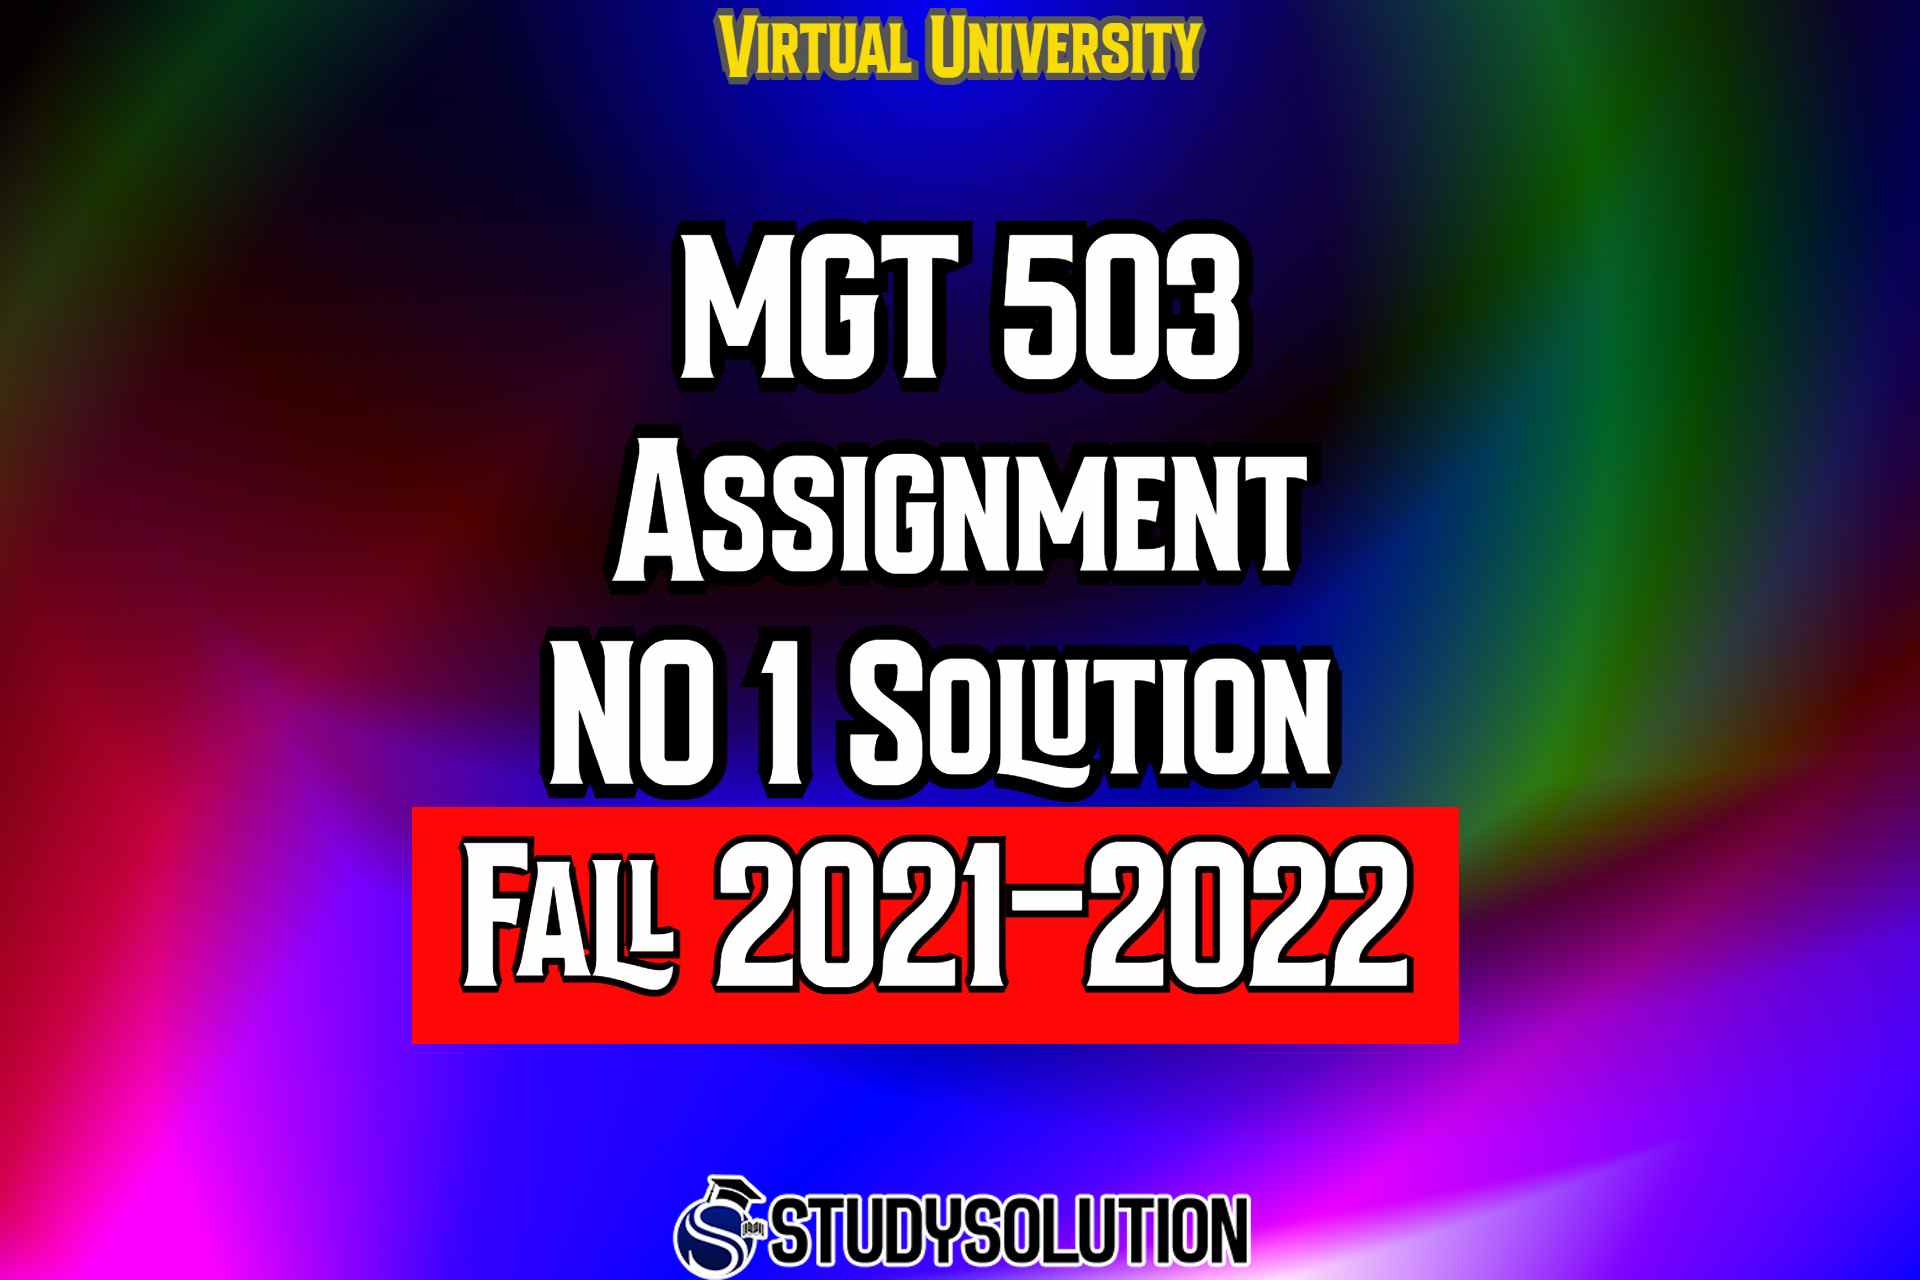 MGT503 Assignment No 1 Solution Fall 2022